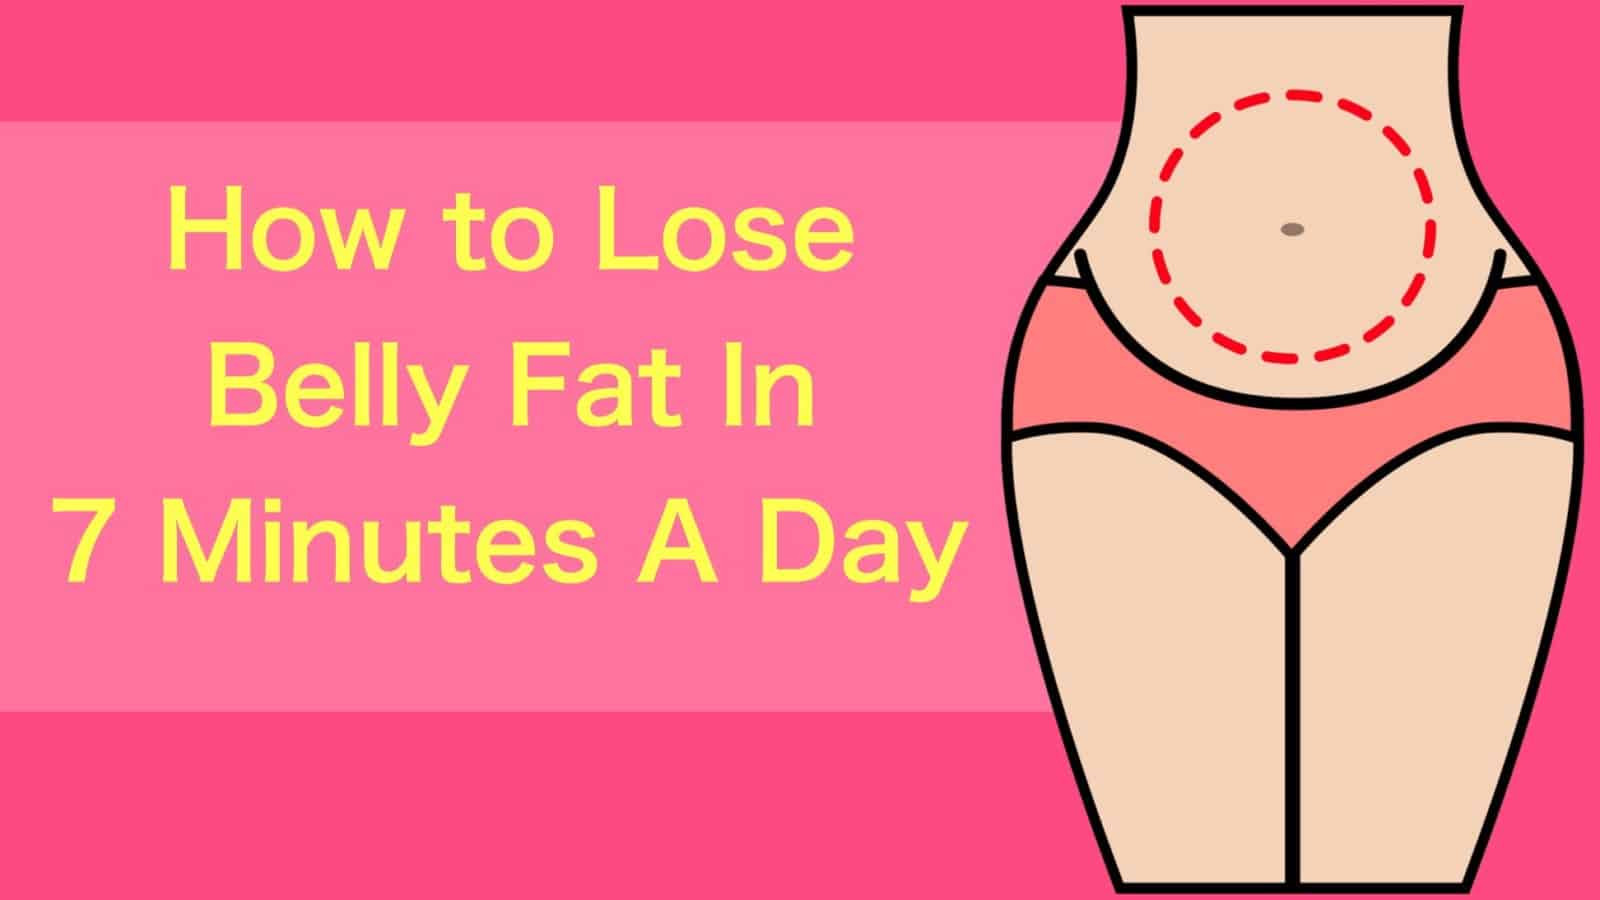 How To Lose Belly Fat
 How to Lose Belly Fat In 7 Minutes A Day